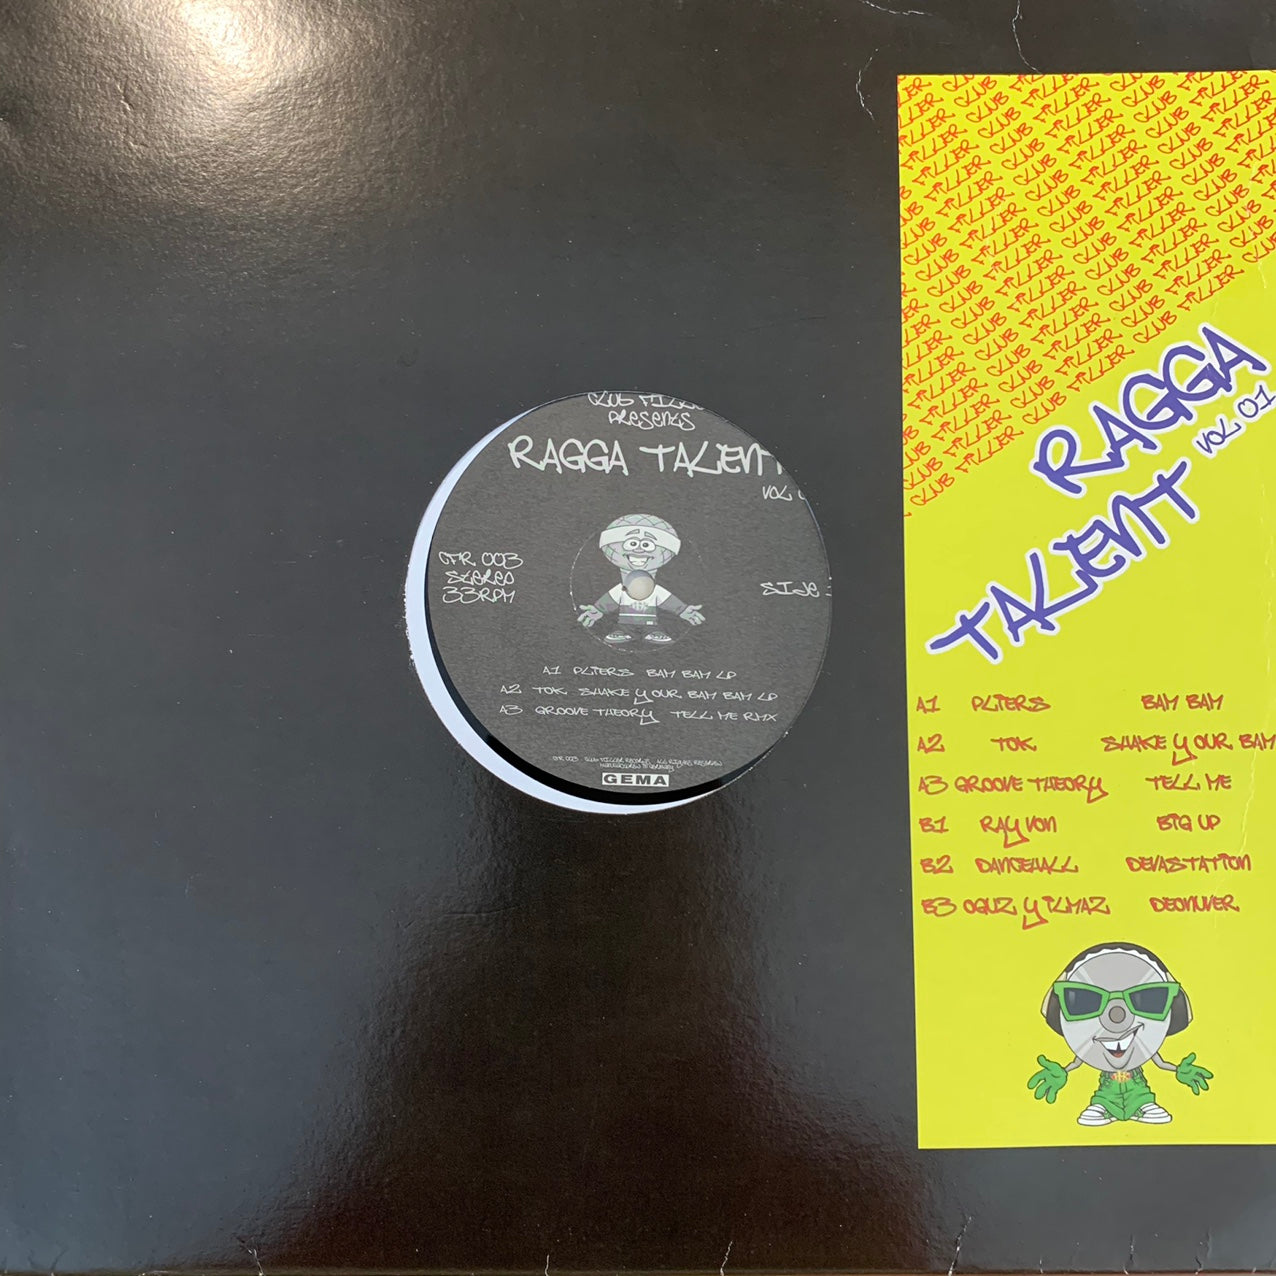 Ragga Talent Vol 1, Featuring Pliers, TOK, Rayvon, Groove Theory and More 6 Track 12inch Vinyl